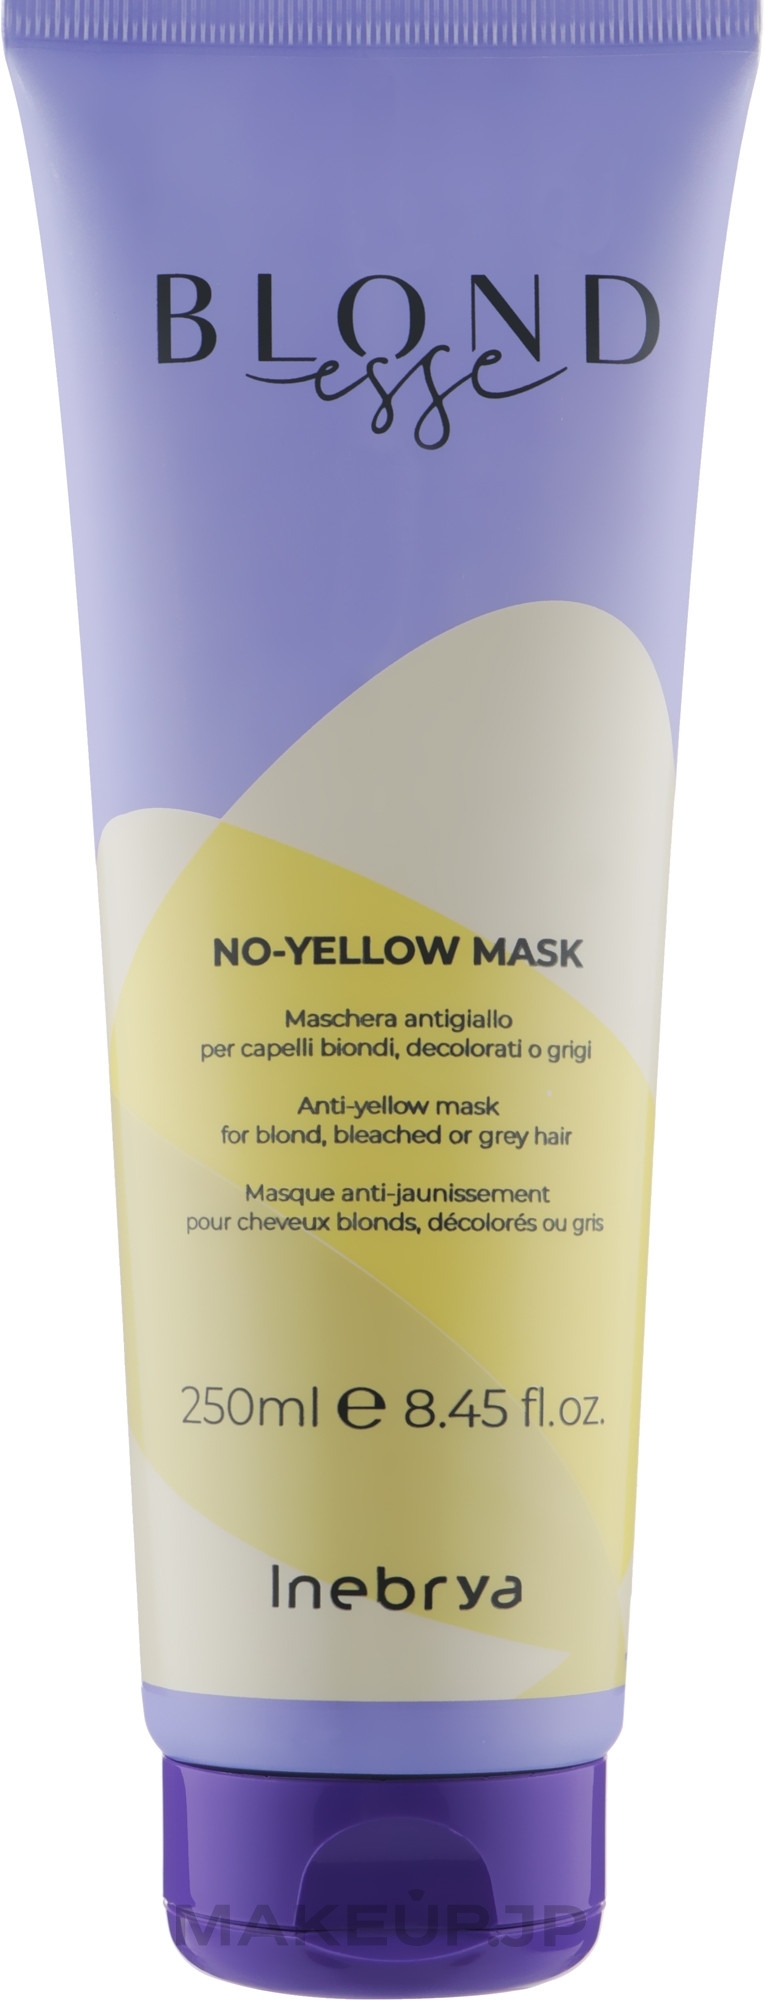 Mask for Blonde, Bleached & Grey Hair - Inebrya Blondesse No-Yellow Mask — photo 250 ml